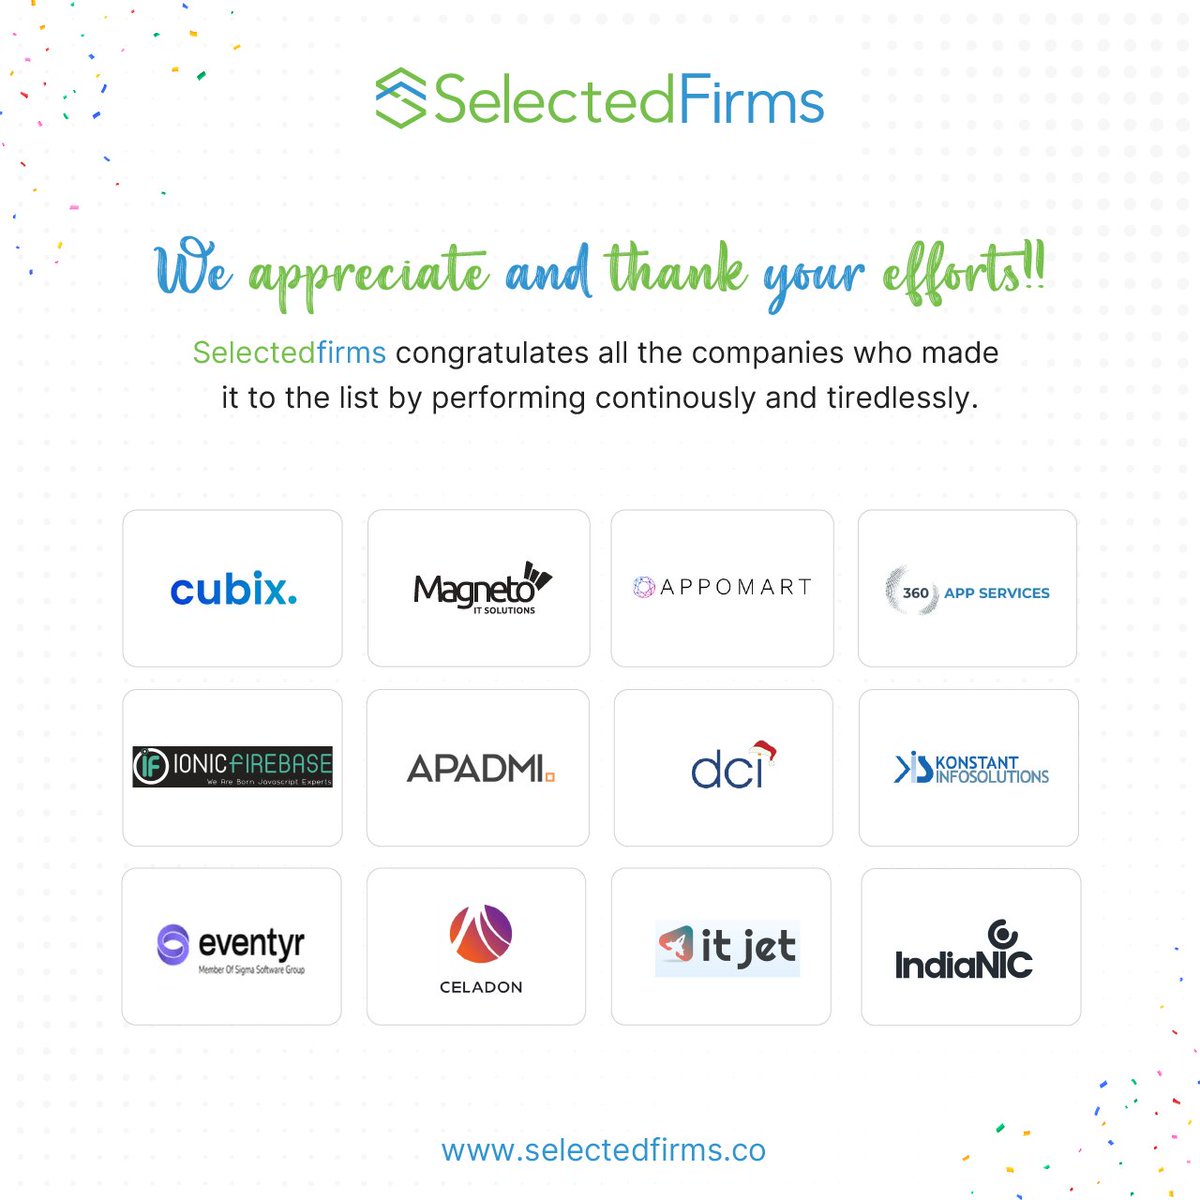 SelectedFirms sends shoutouts to all the top Mobile App Development Companies in the United States of America: bit.ly/3RP3Zkf
Congratulations!
🎯@dotcominfoway
🎯@konstantinfo
🎯 Eventyr
🎯 Celadon
🎯 Itjet
🎯IndiaNICInfotech